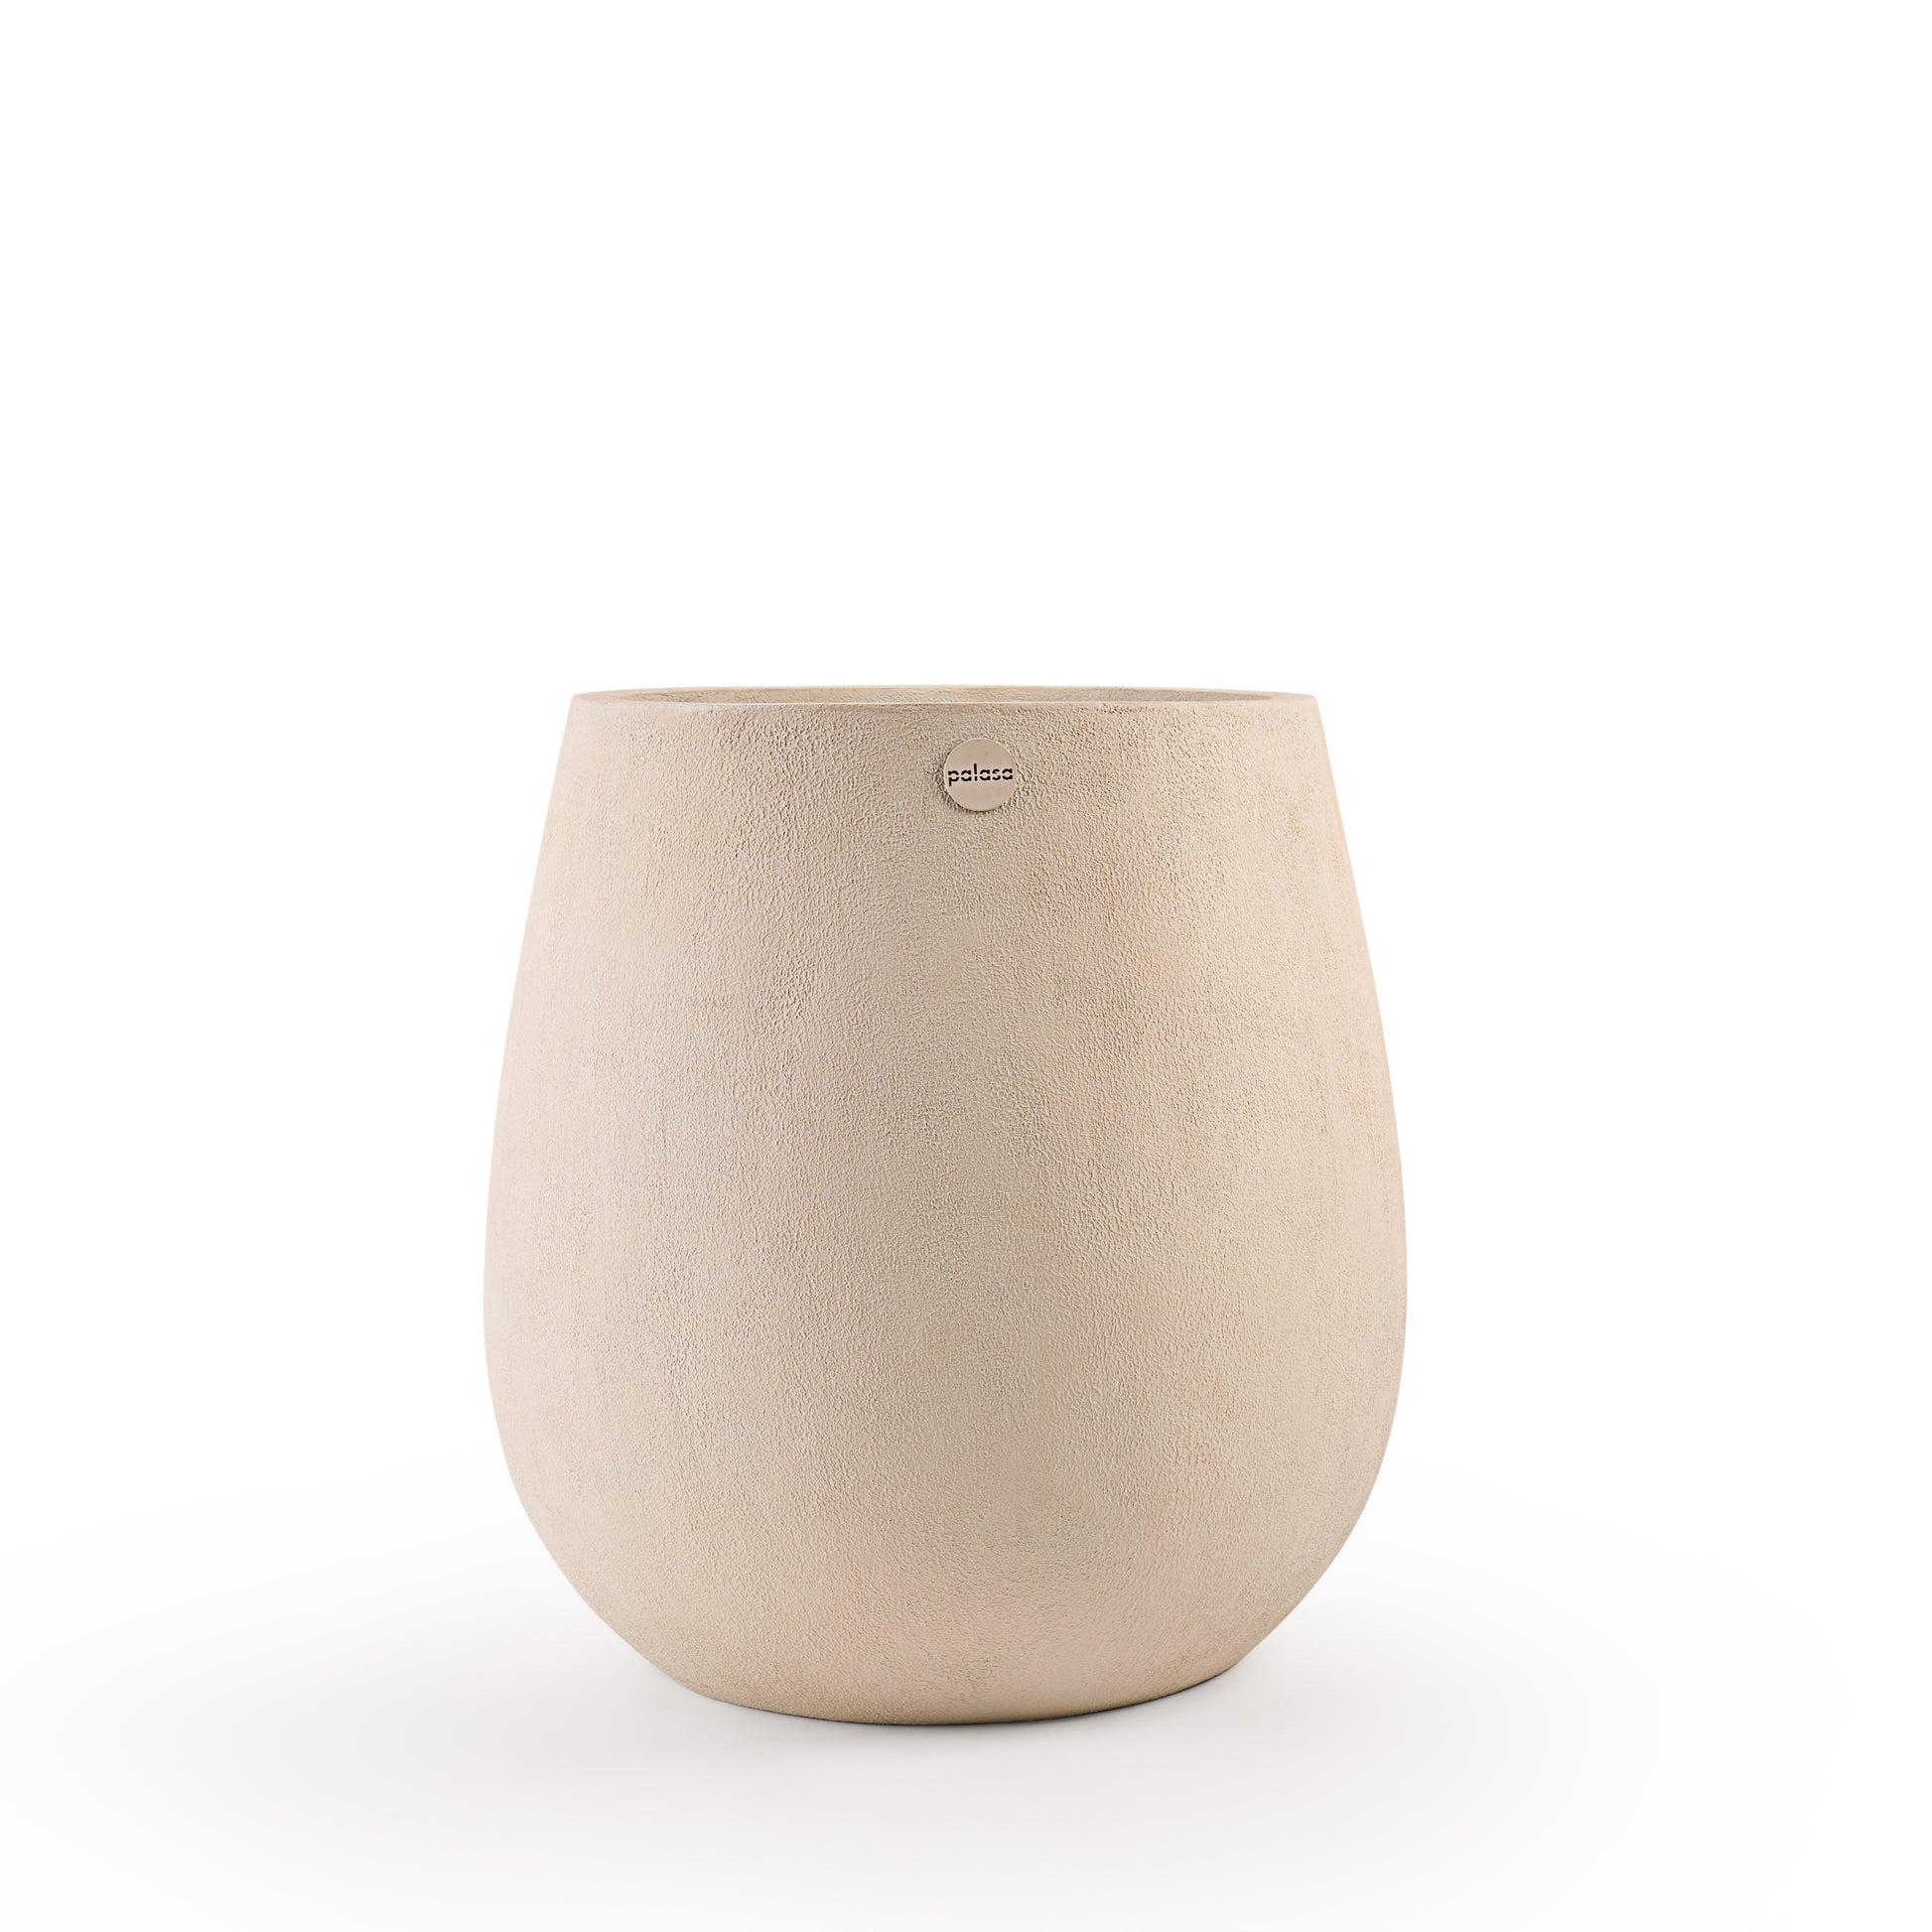 Buy FRP beige round pots Bangalore. Modern planters for Indoor, Outdoor, Balcony and Garden. Explore our wide range of FRP Planters, Concrete pots, GRC pots, Living room Planters, Garden Planters, Balcony Pots, Indoor Plant Pots, Hanging pots @Palasa. Large FRP planters available in various colours.